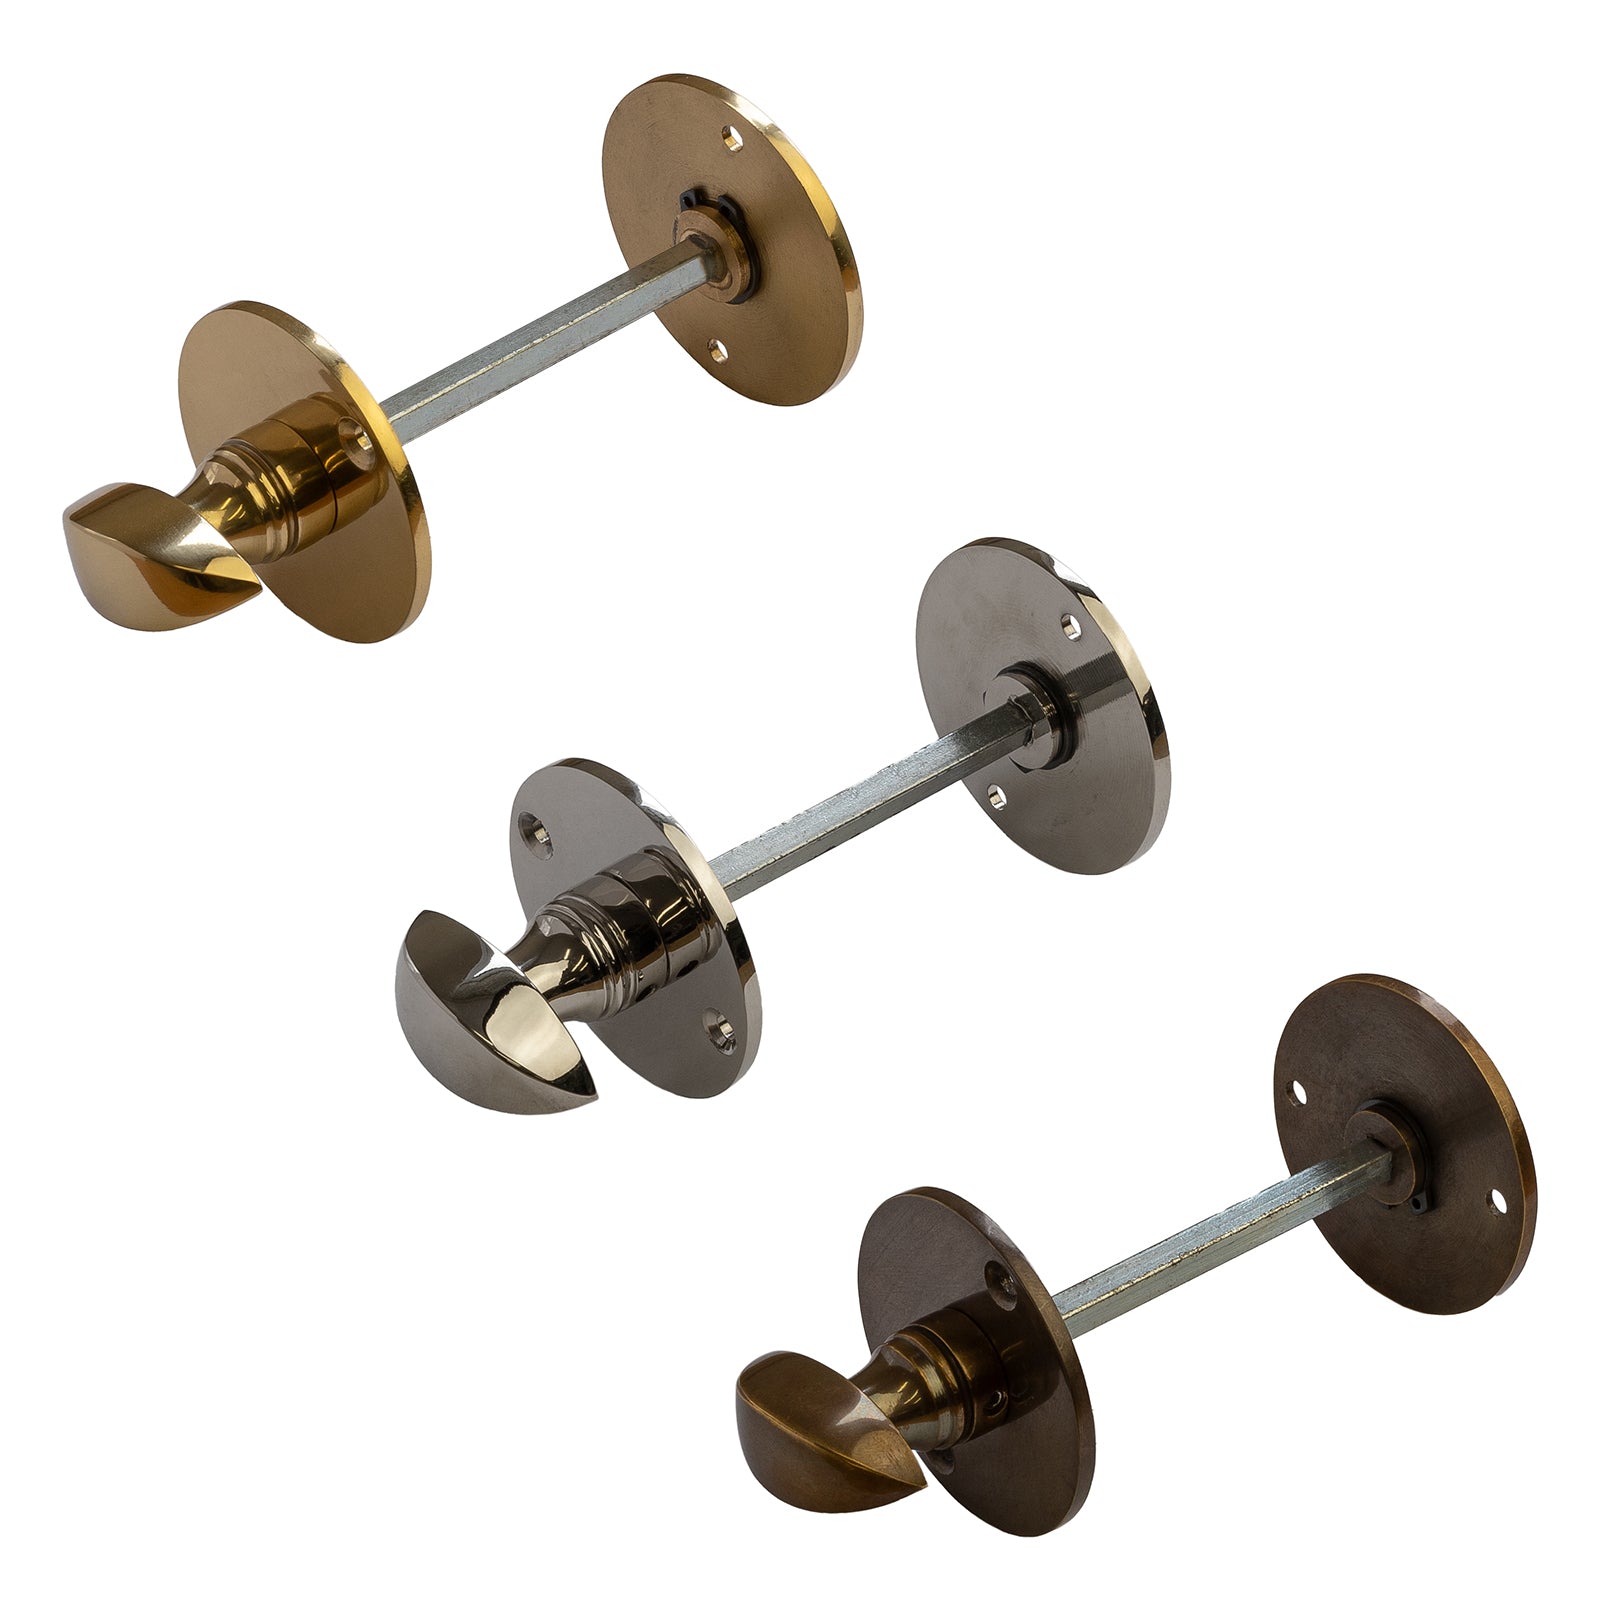 Classic Bathroom Turn & Releases solid brass